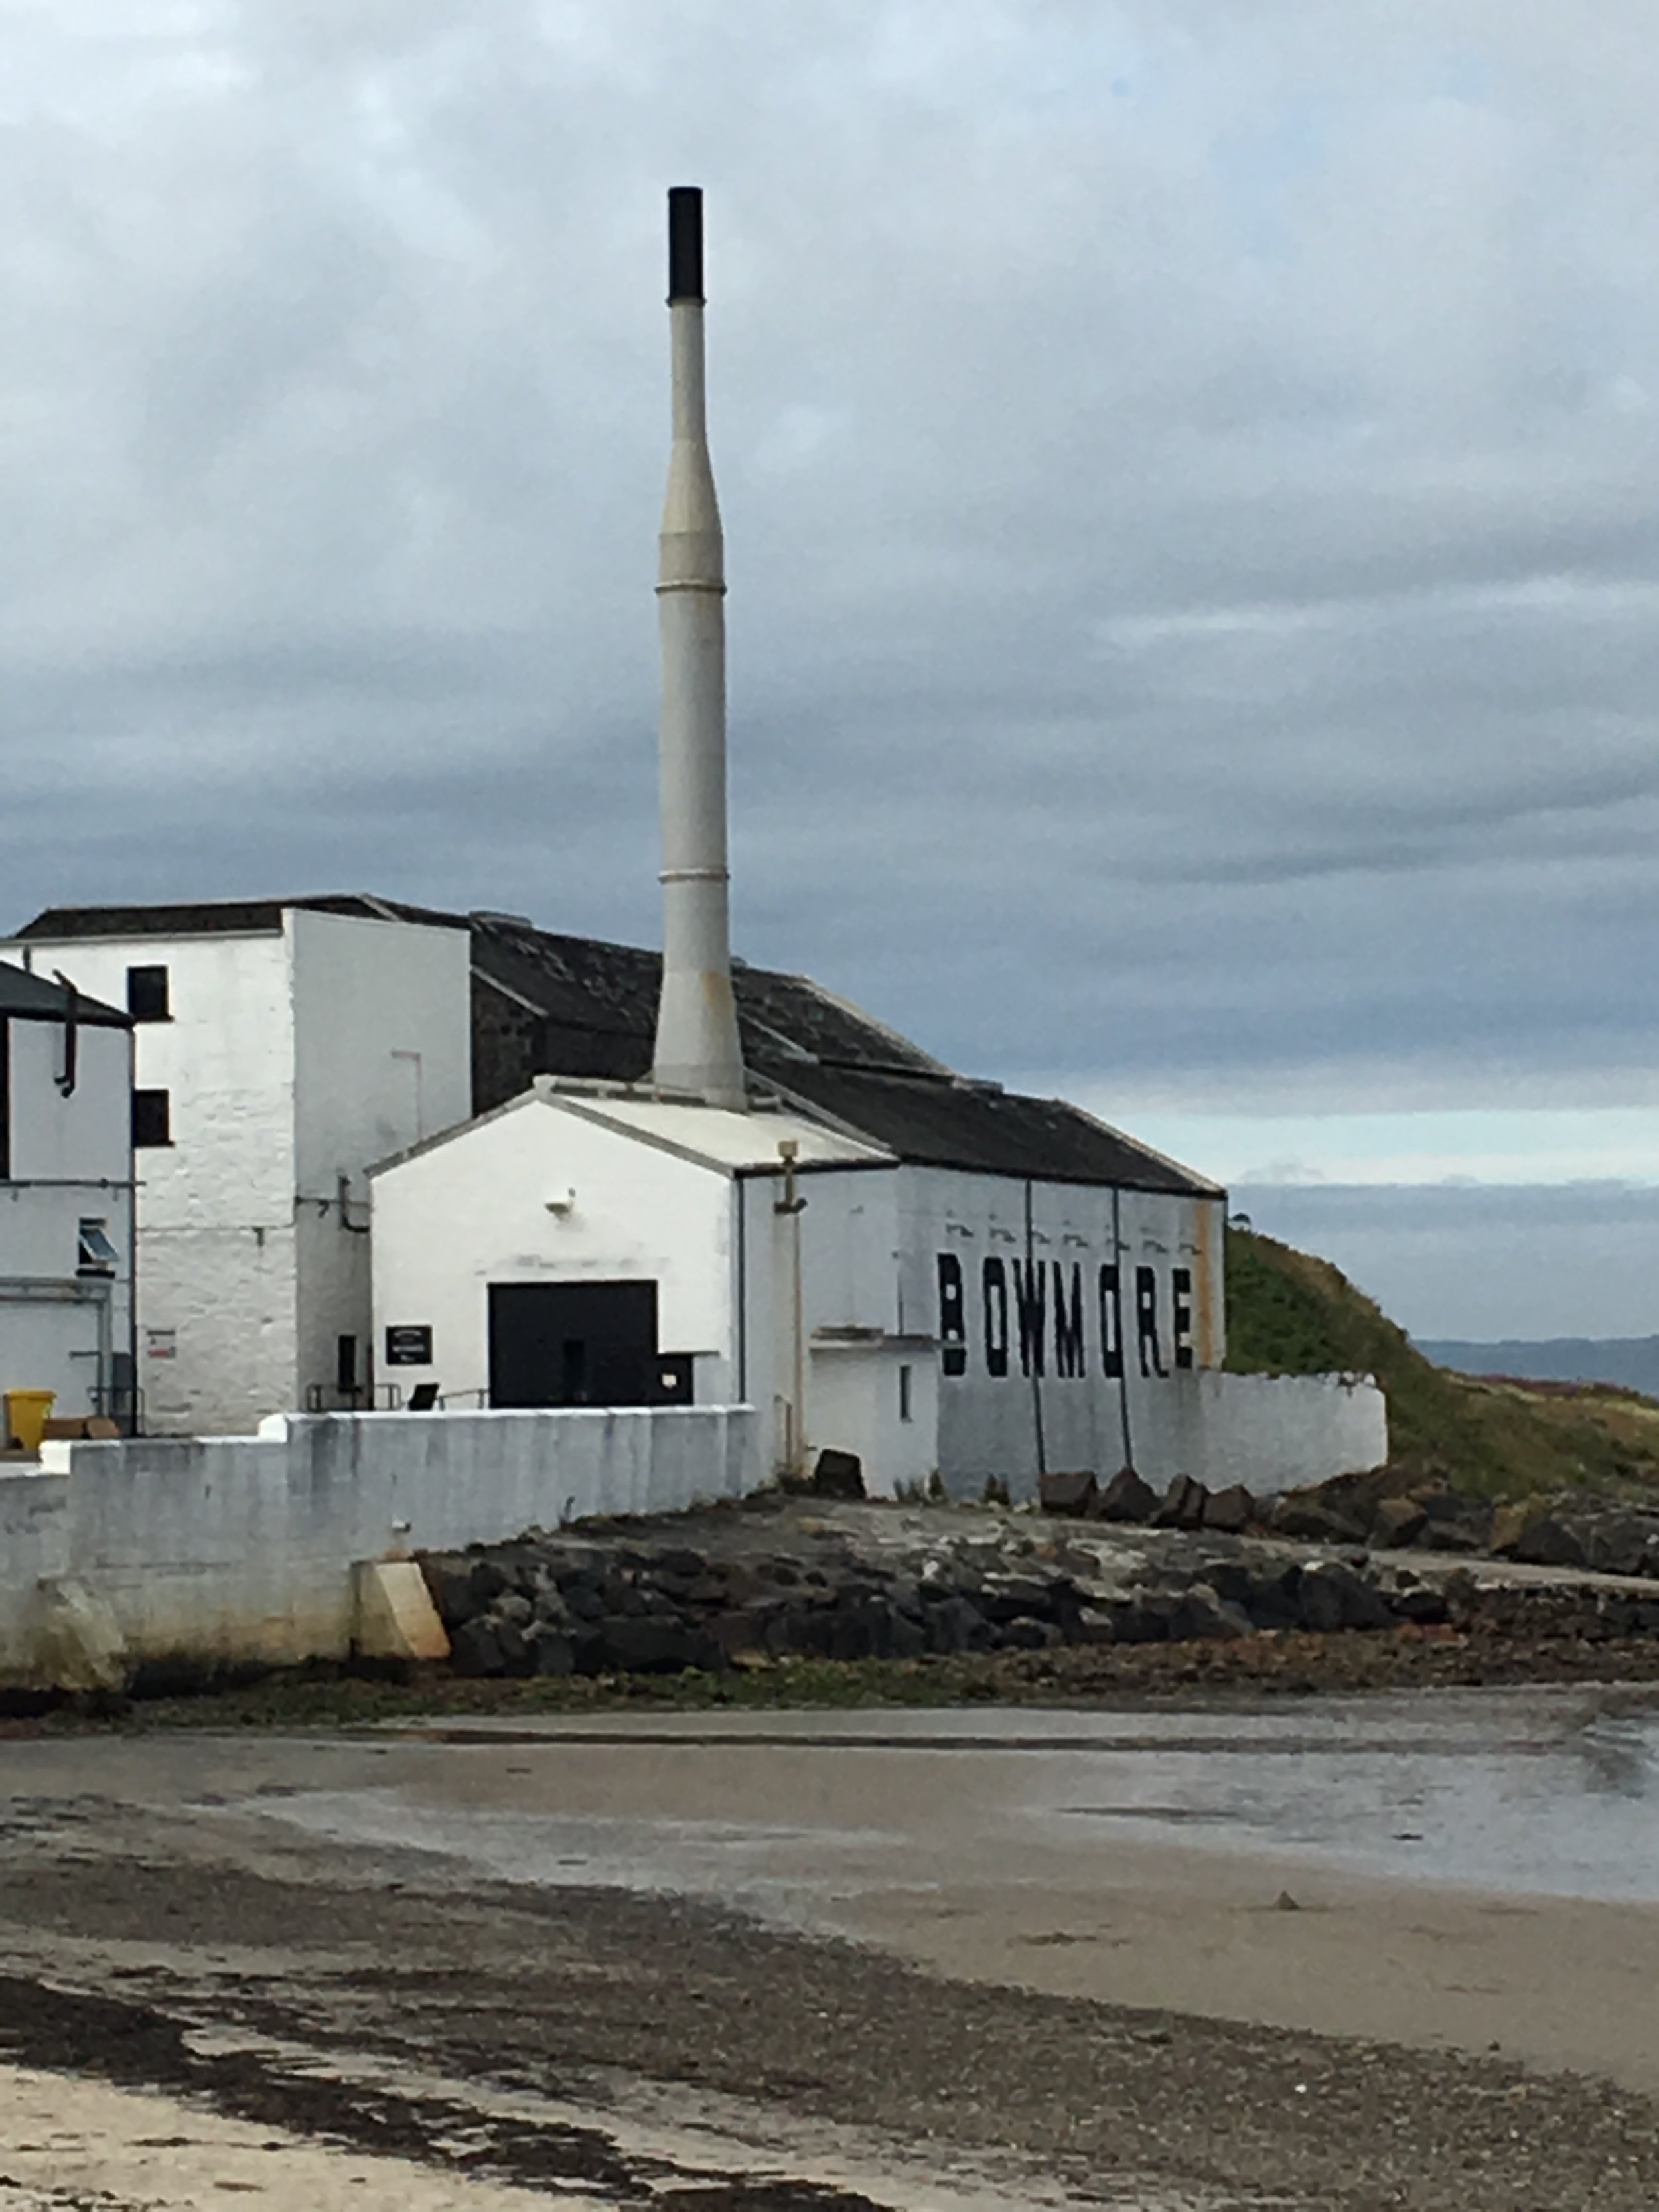 View of Bowmore Distillery from the beach on Islay